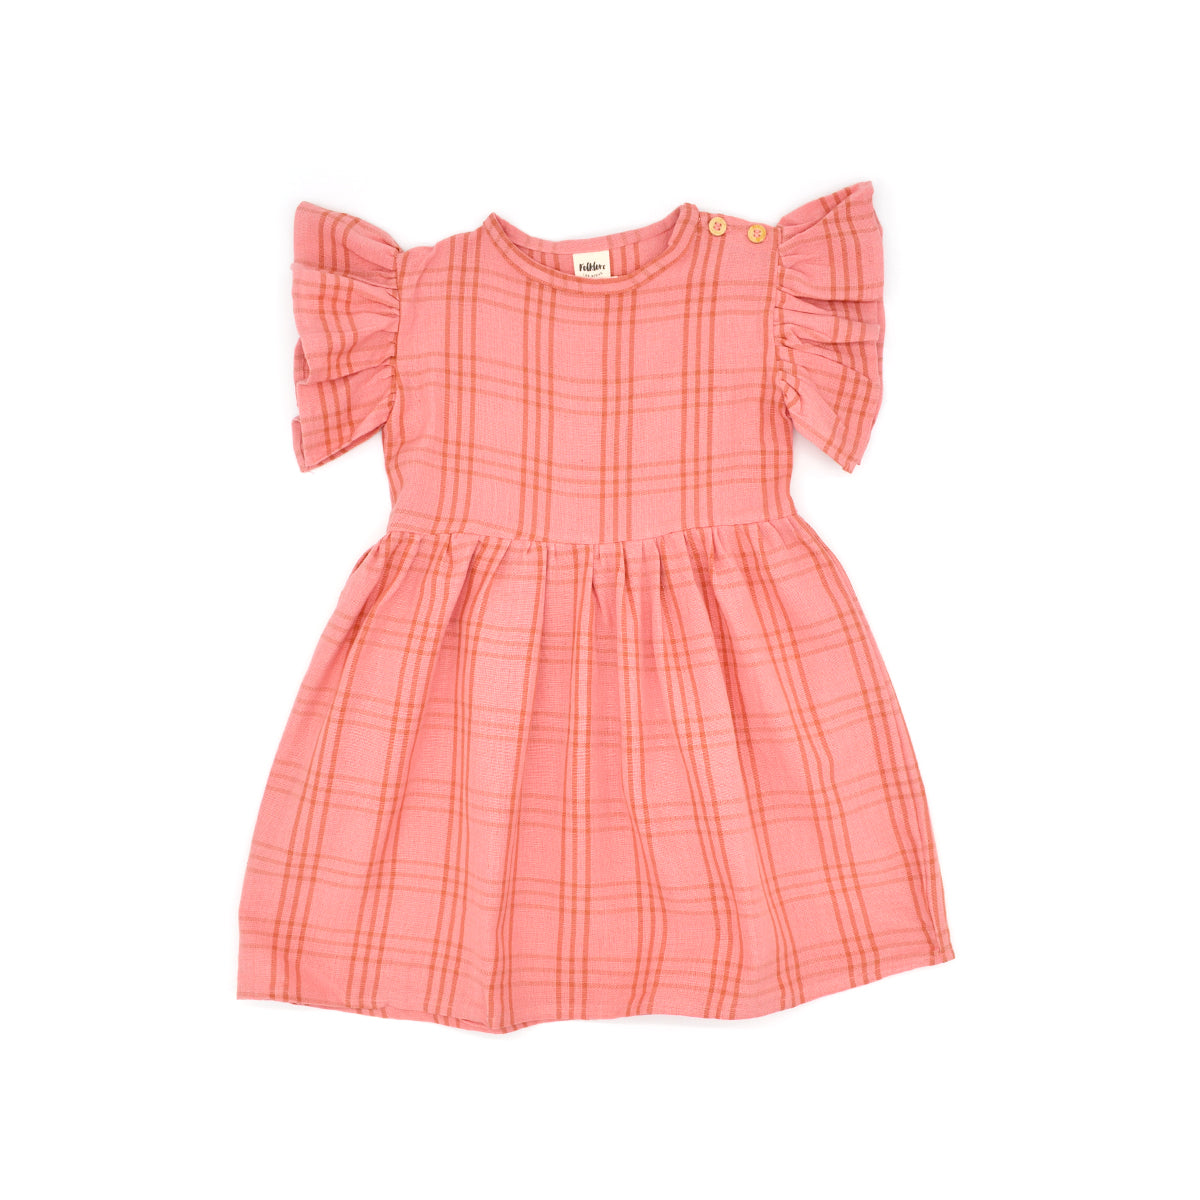 Cece Girl Dress in Amber by Folklore Las Ninas